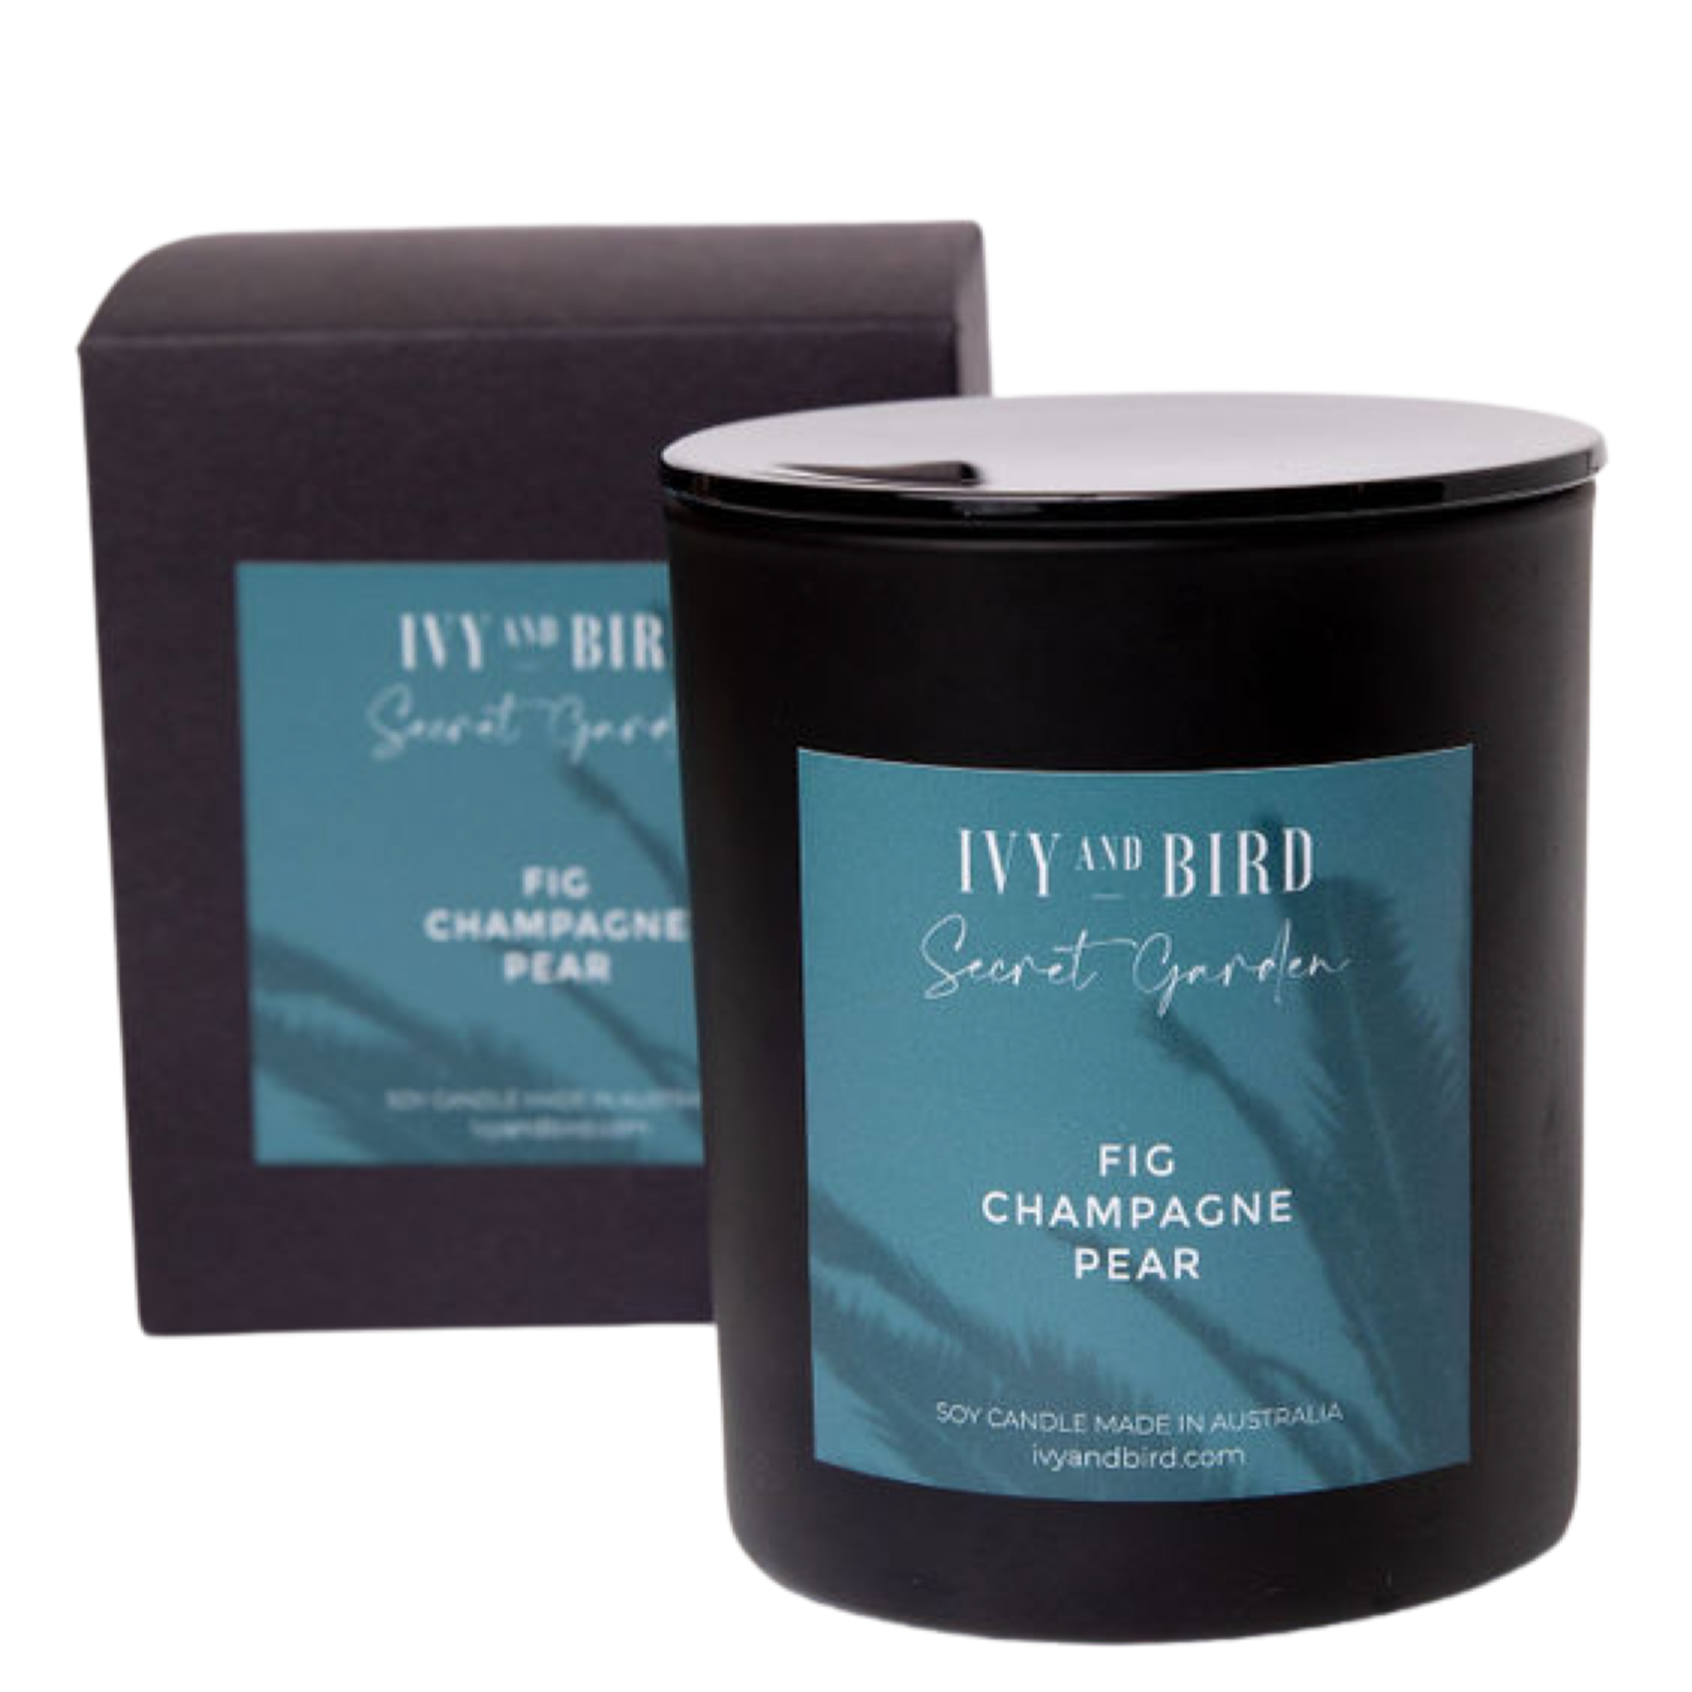 FIG  CHAMPAGNE & PEAR SOY CANDLE - SECRET GARDEN